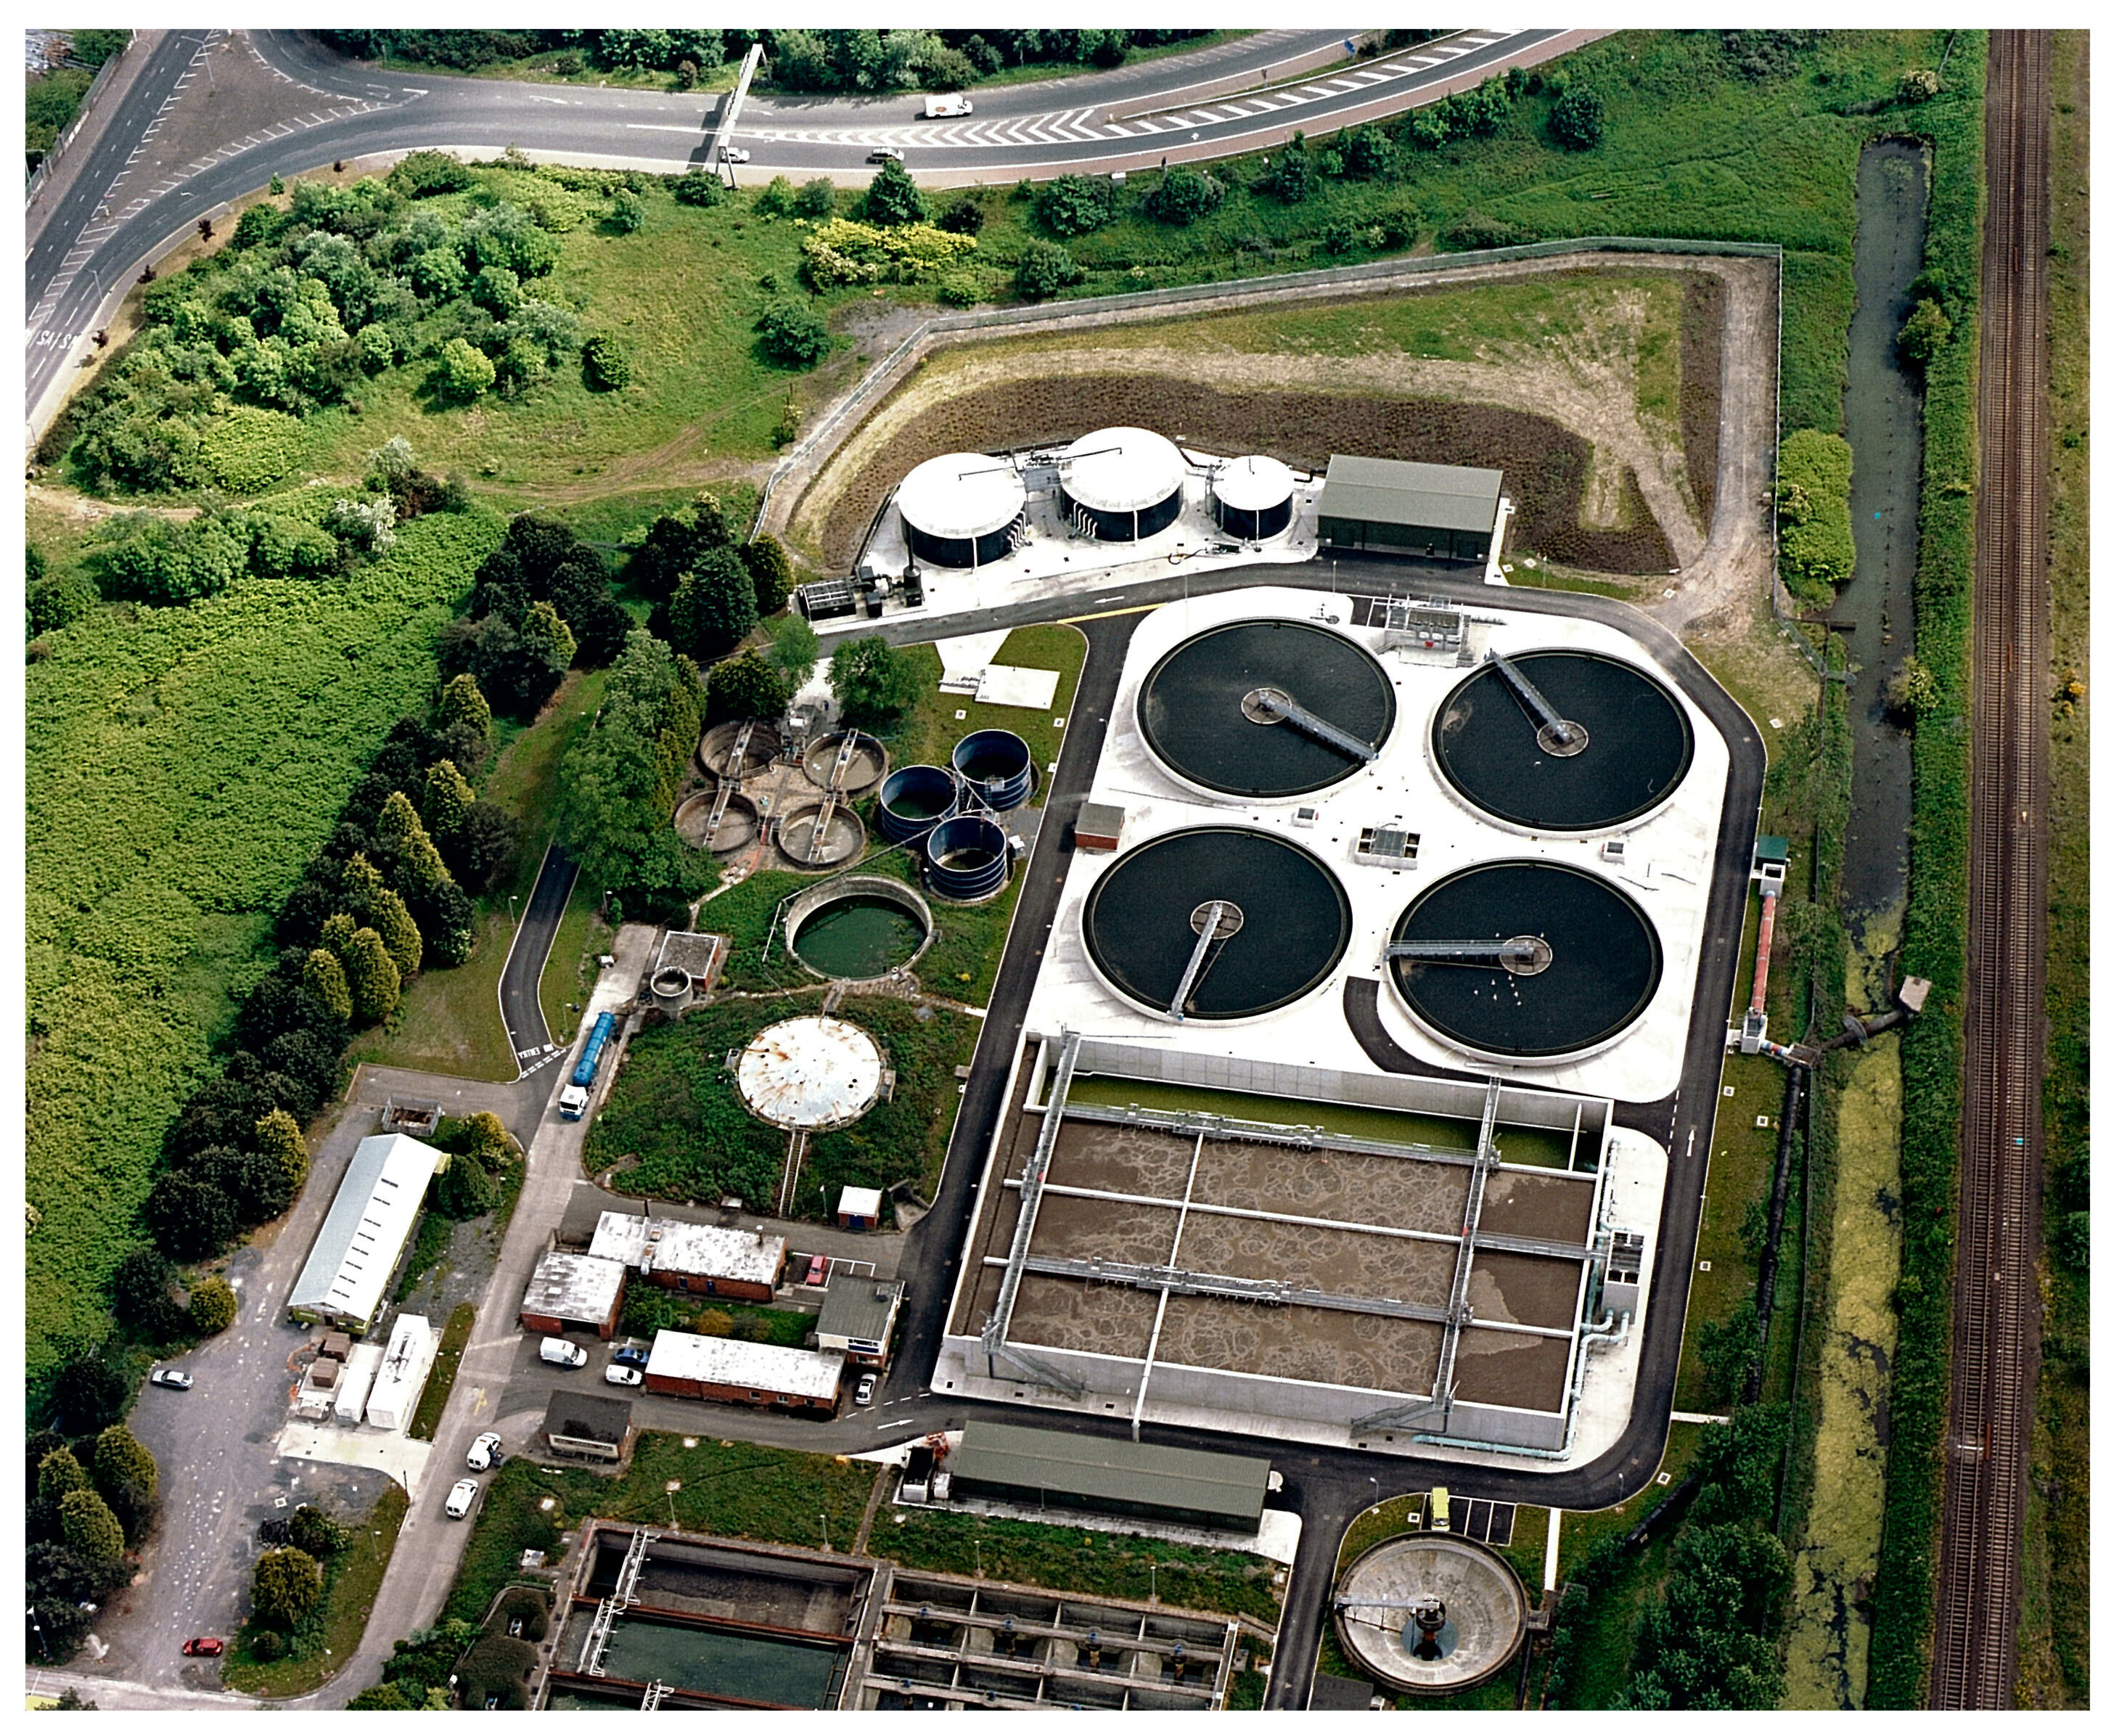 a case study of integrated wastewater treatment